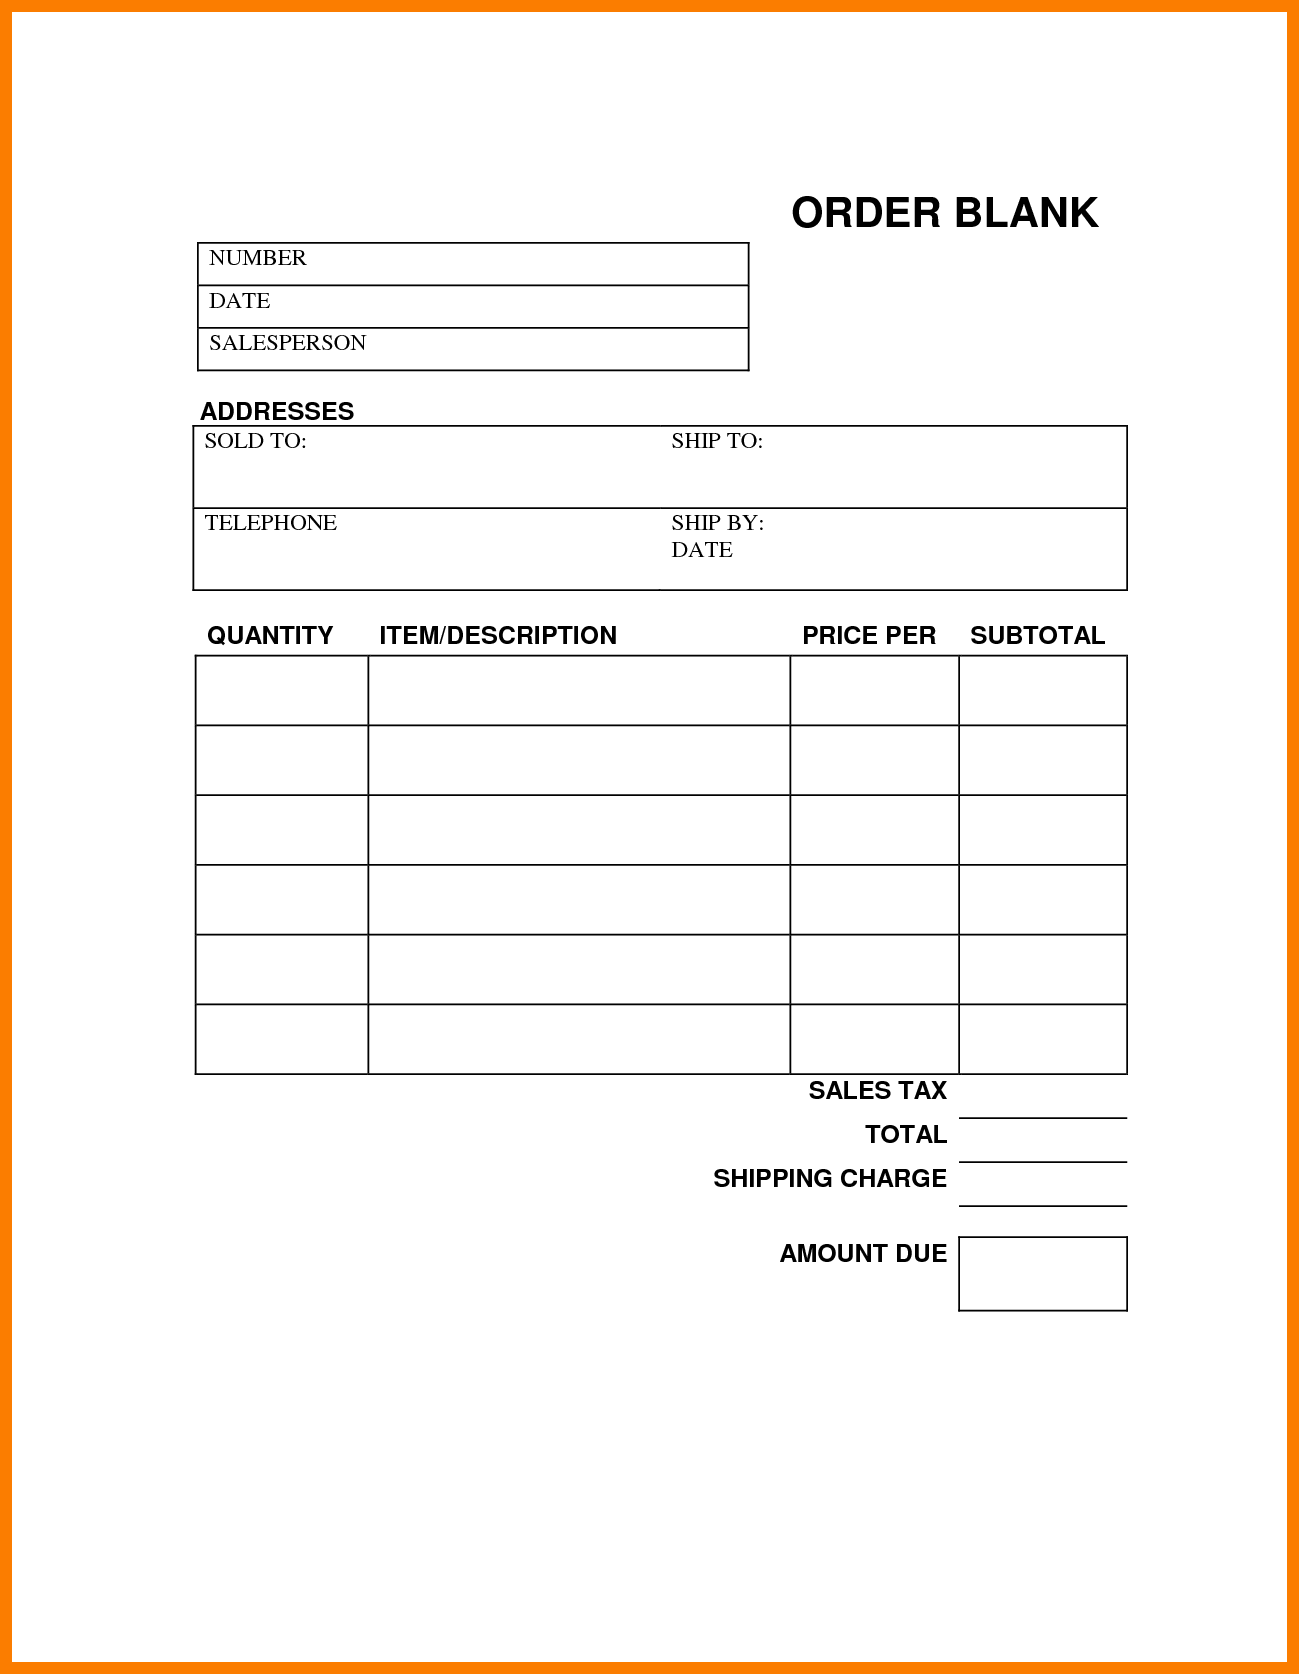 2-printable-order-form-template-free-downloads-freebie-finding-mom